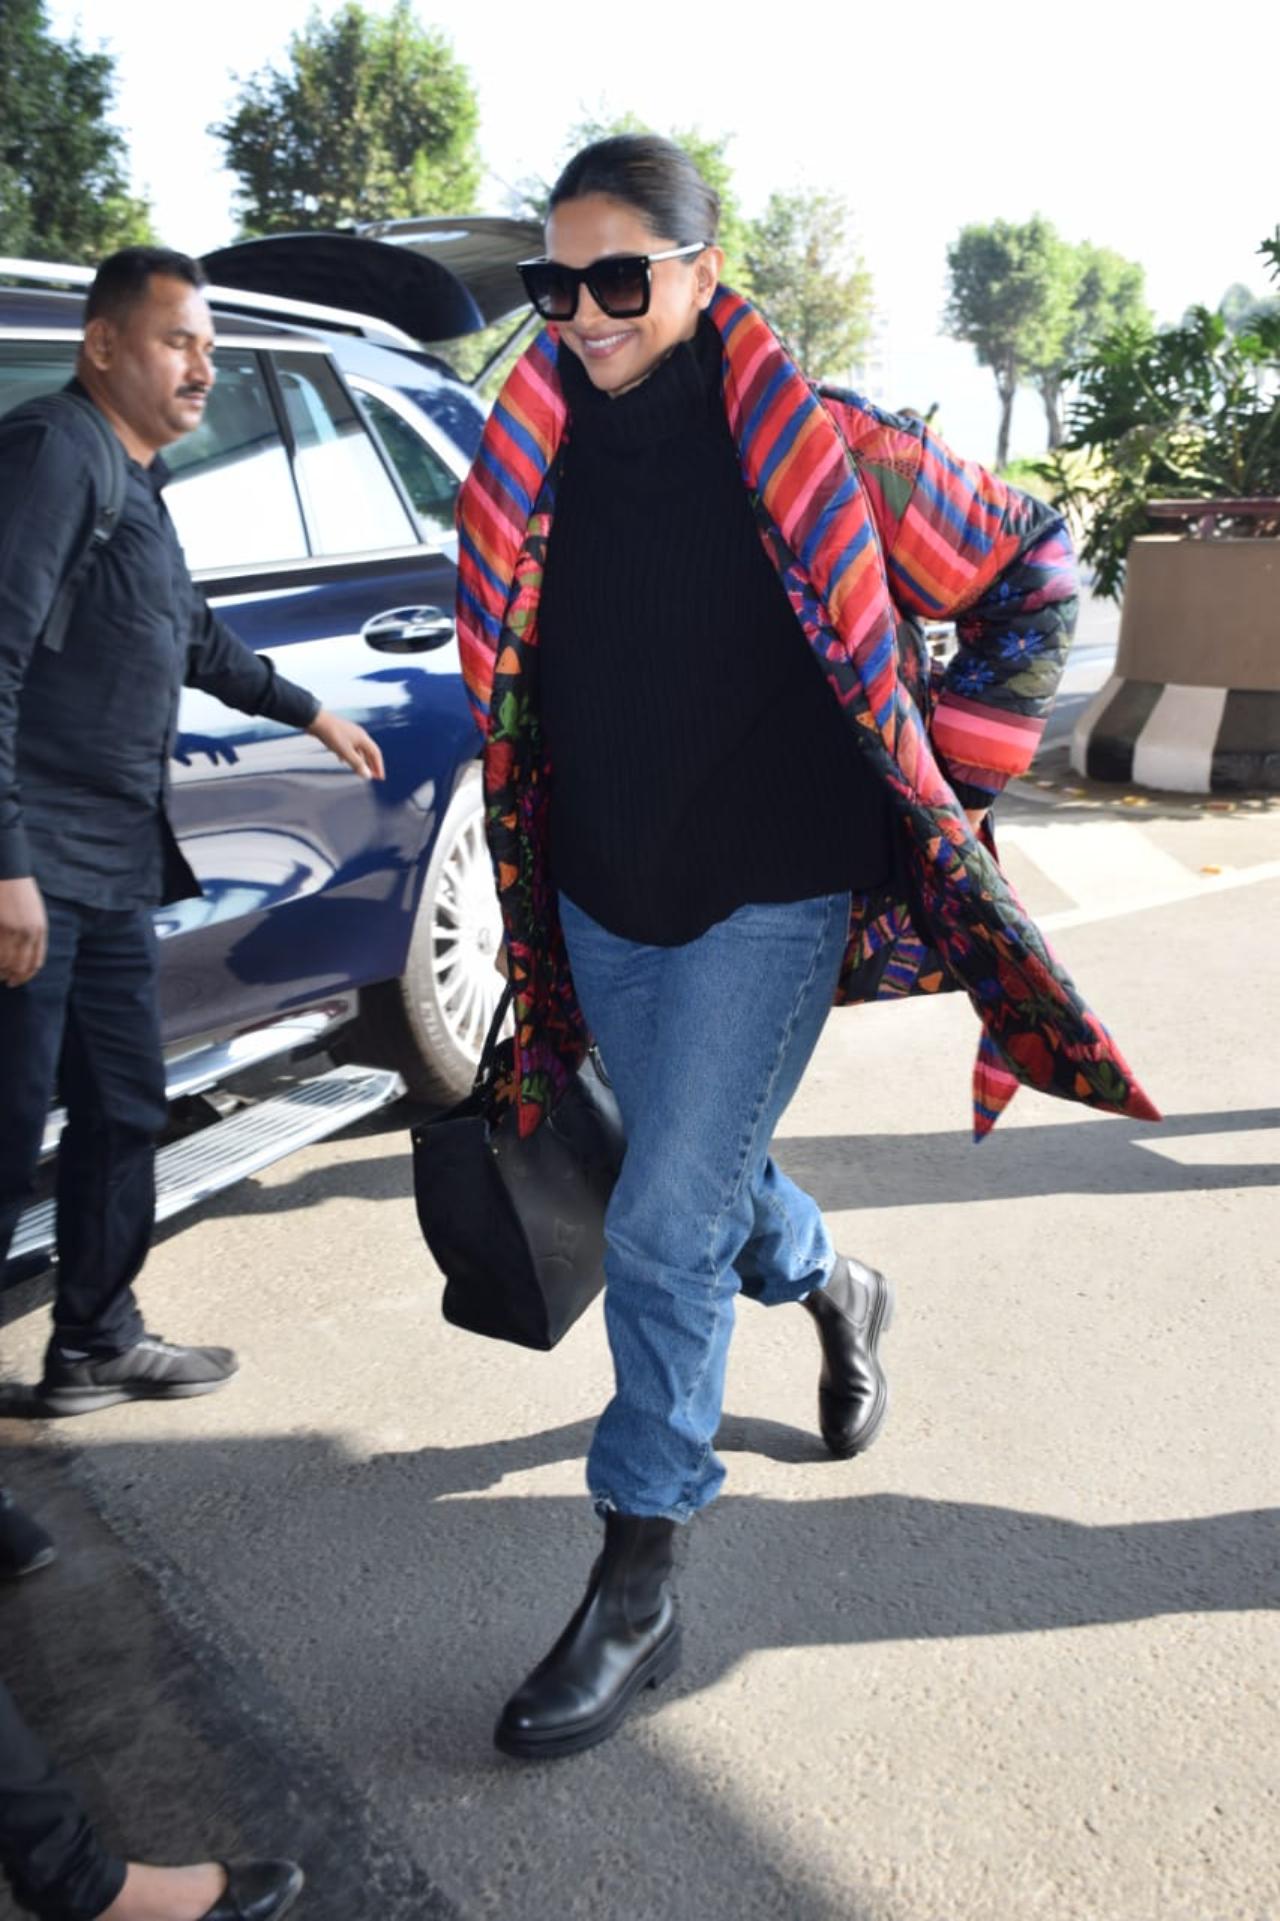 Deepika Padukone arrived at the airport in a black top and blue denims paired with black boots and a long colourful jacket. She had her hair tied in a bun and flashed a big smile before entering the gate